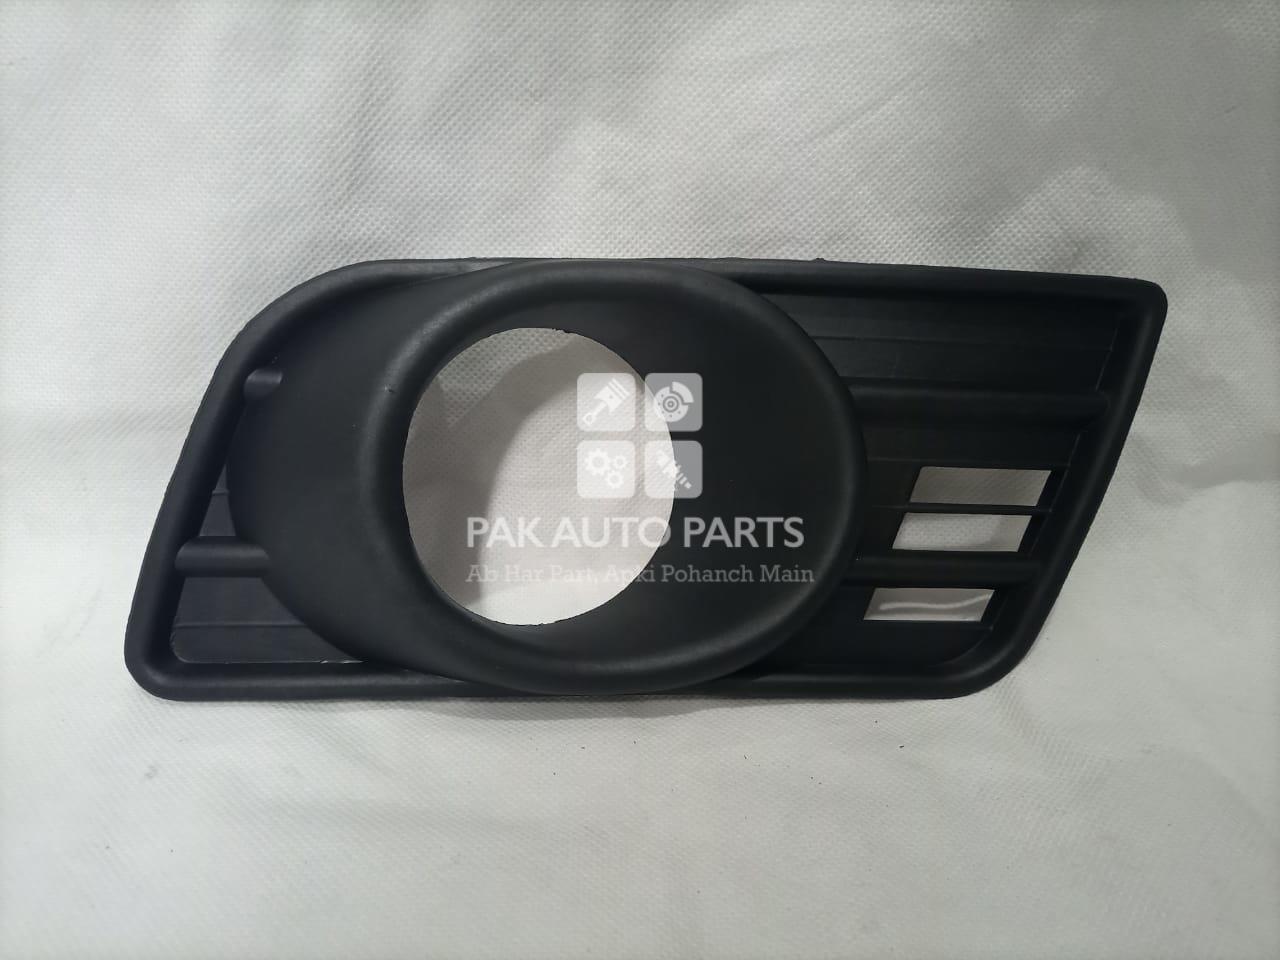 Picture of Suzuki Swift 2009-21 Fog Light Cover With Light Hole